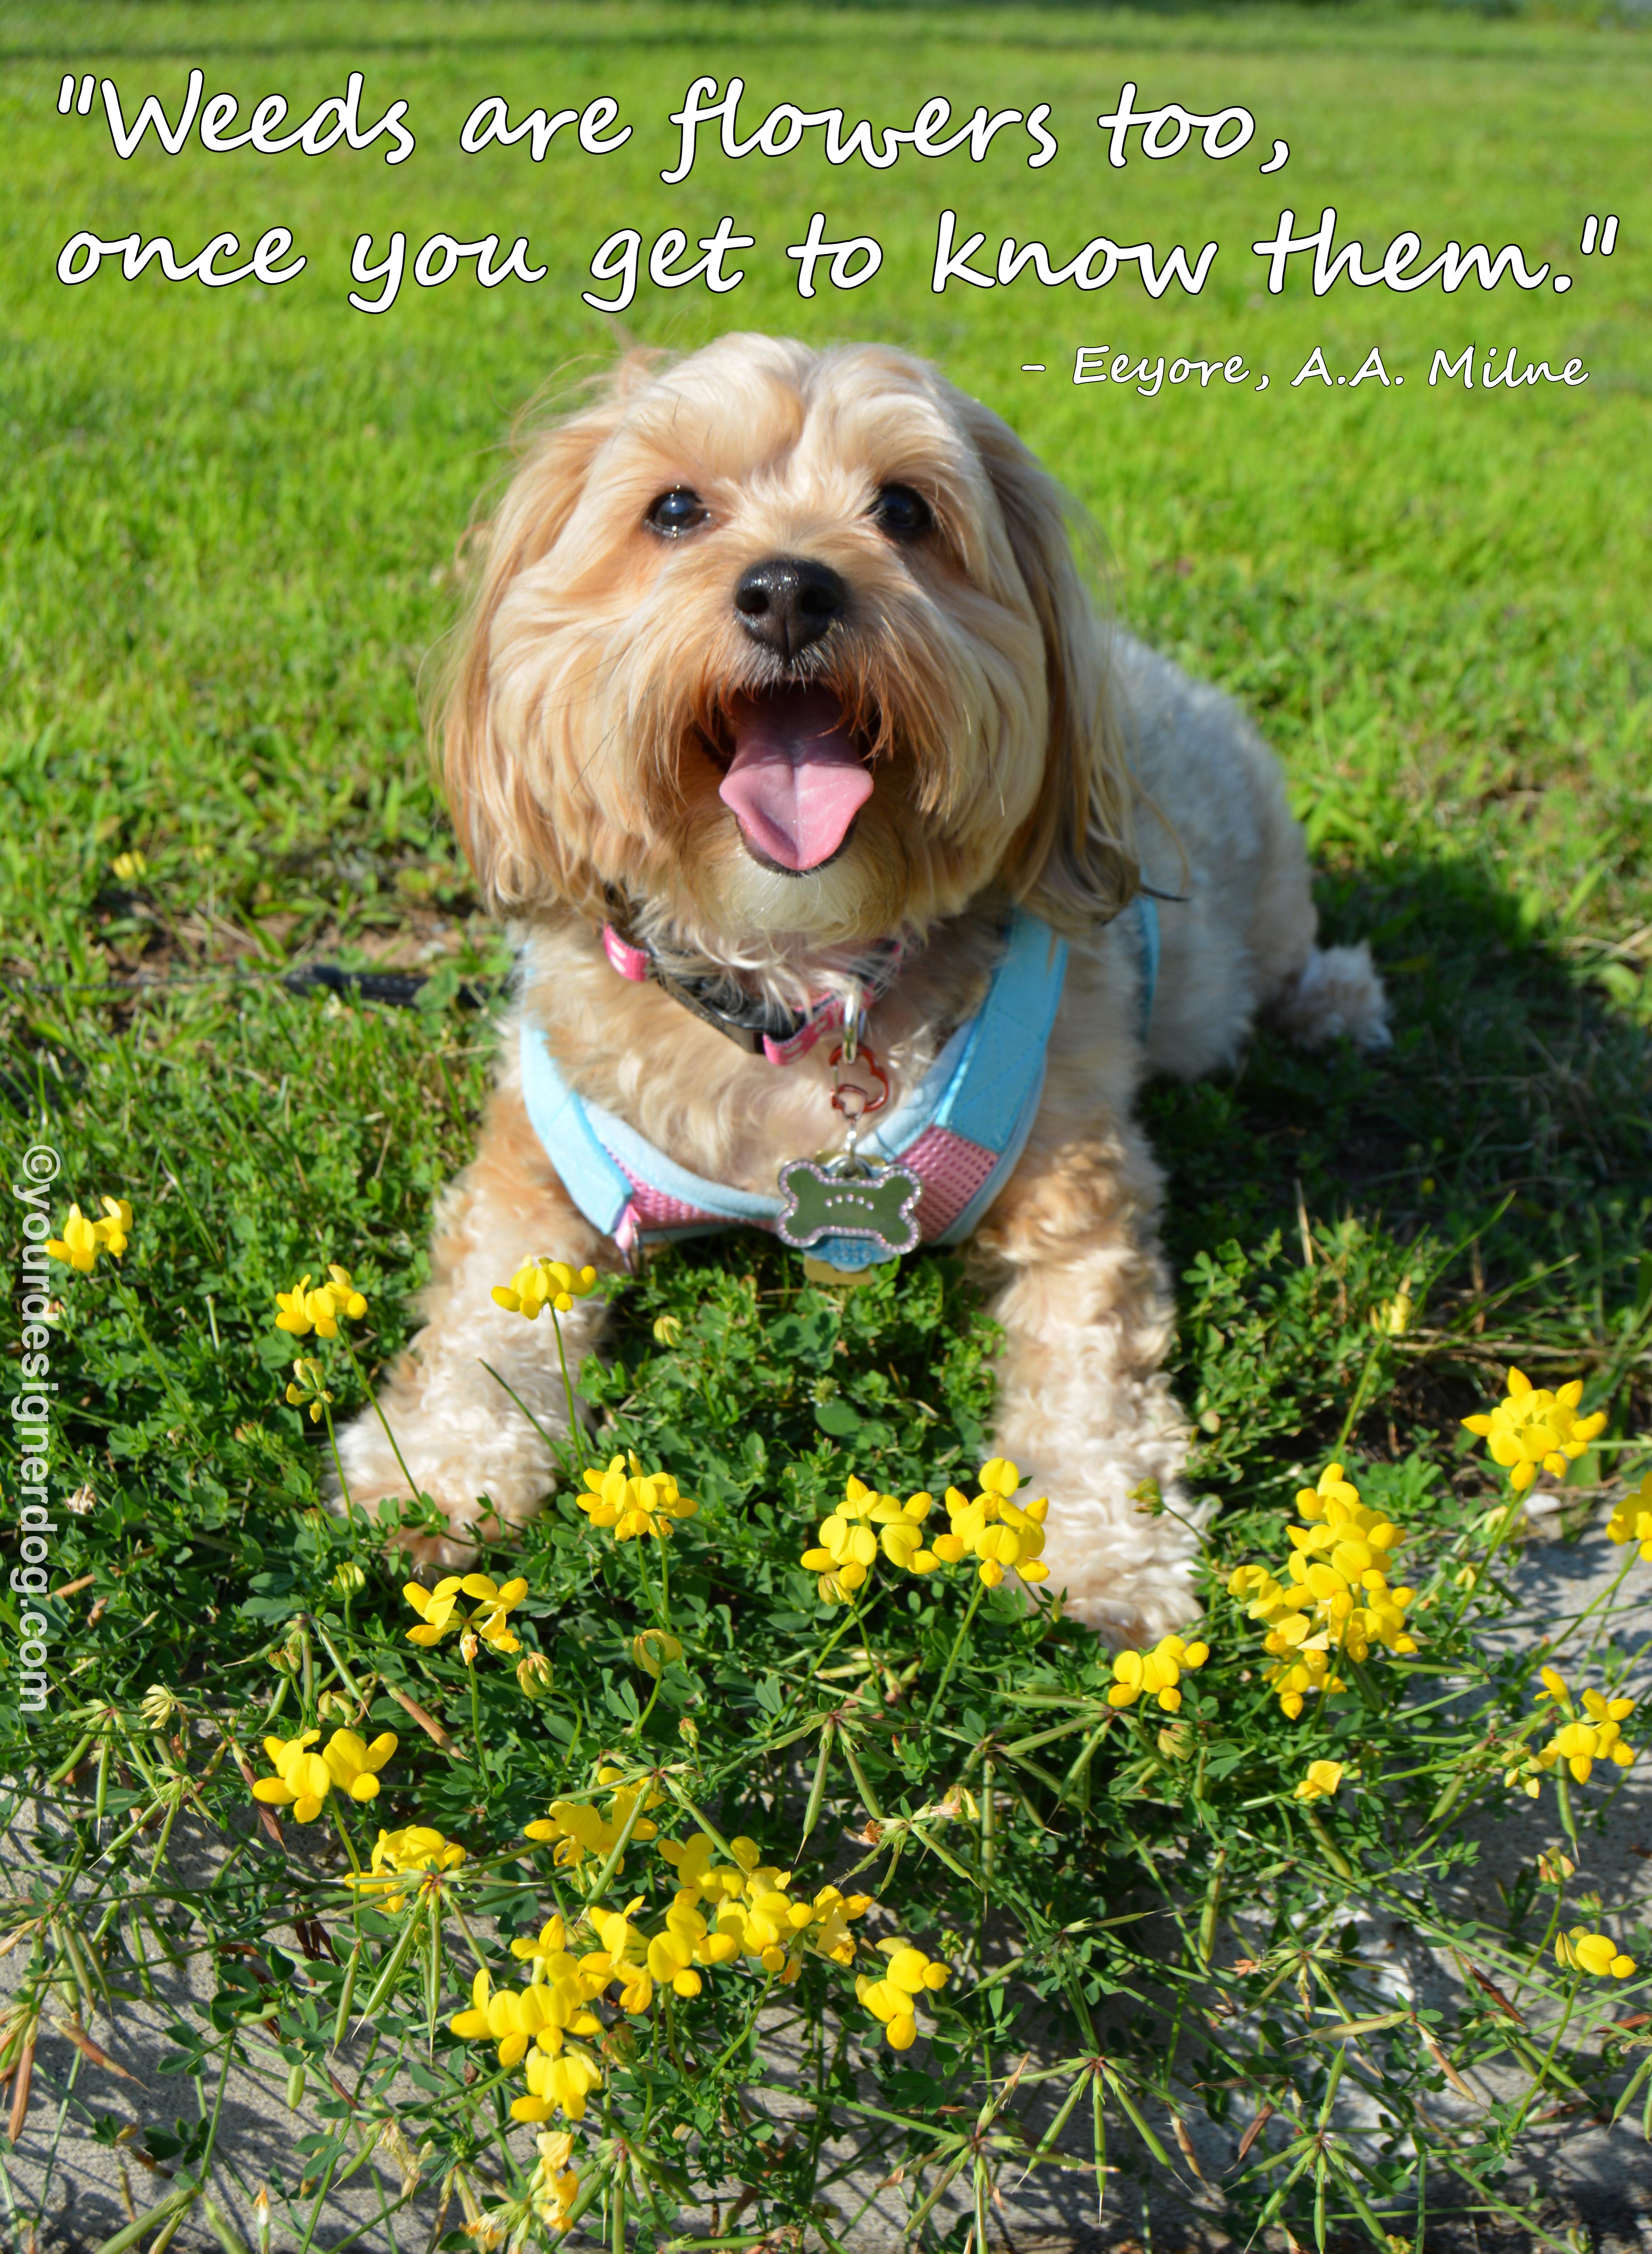 dogs, designer dogs, yorkipoo, yorkie poo, dogs with flowers, wildflowers, weeds, tongue out